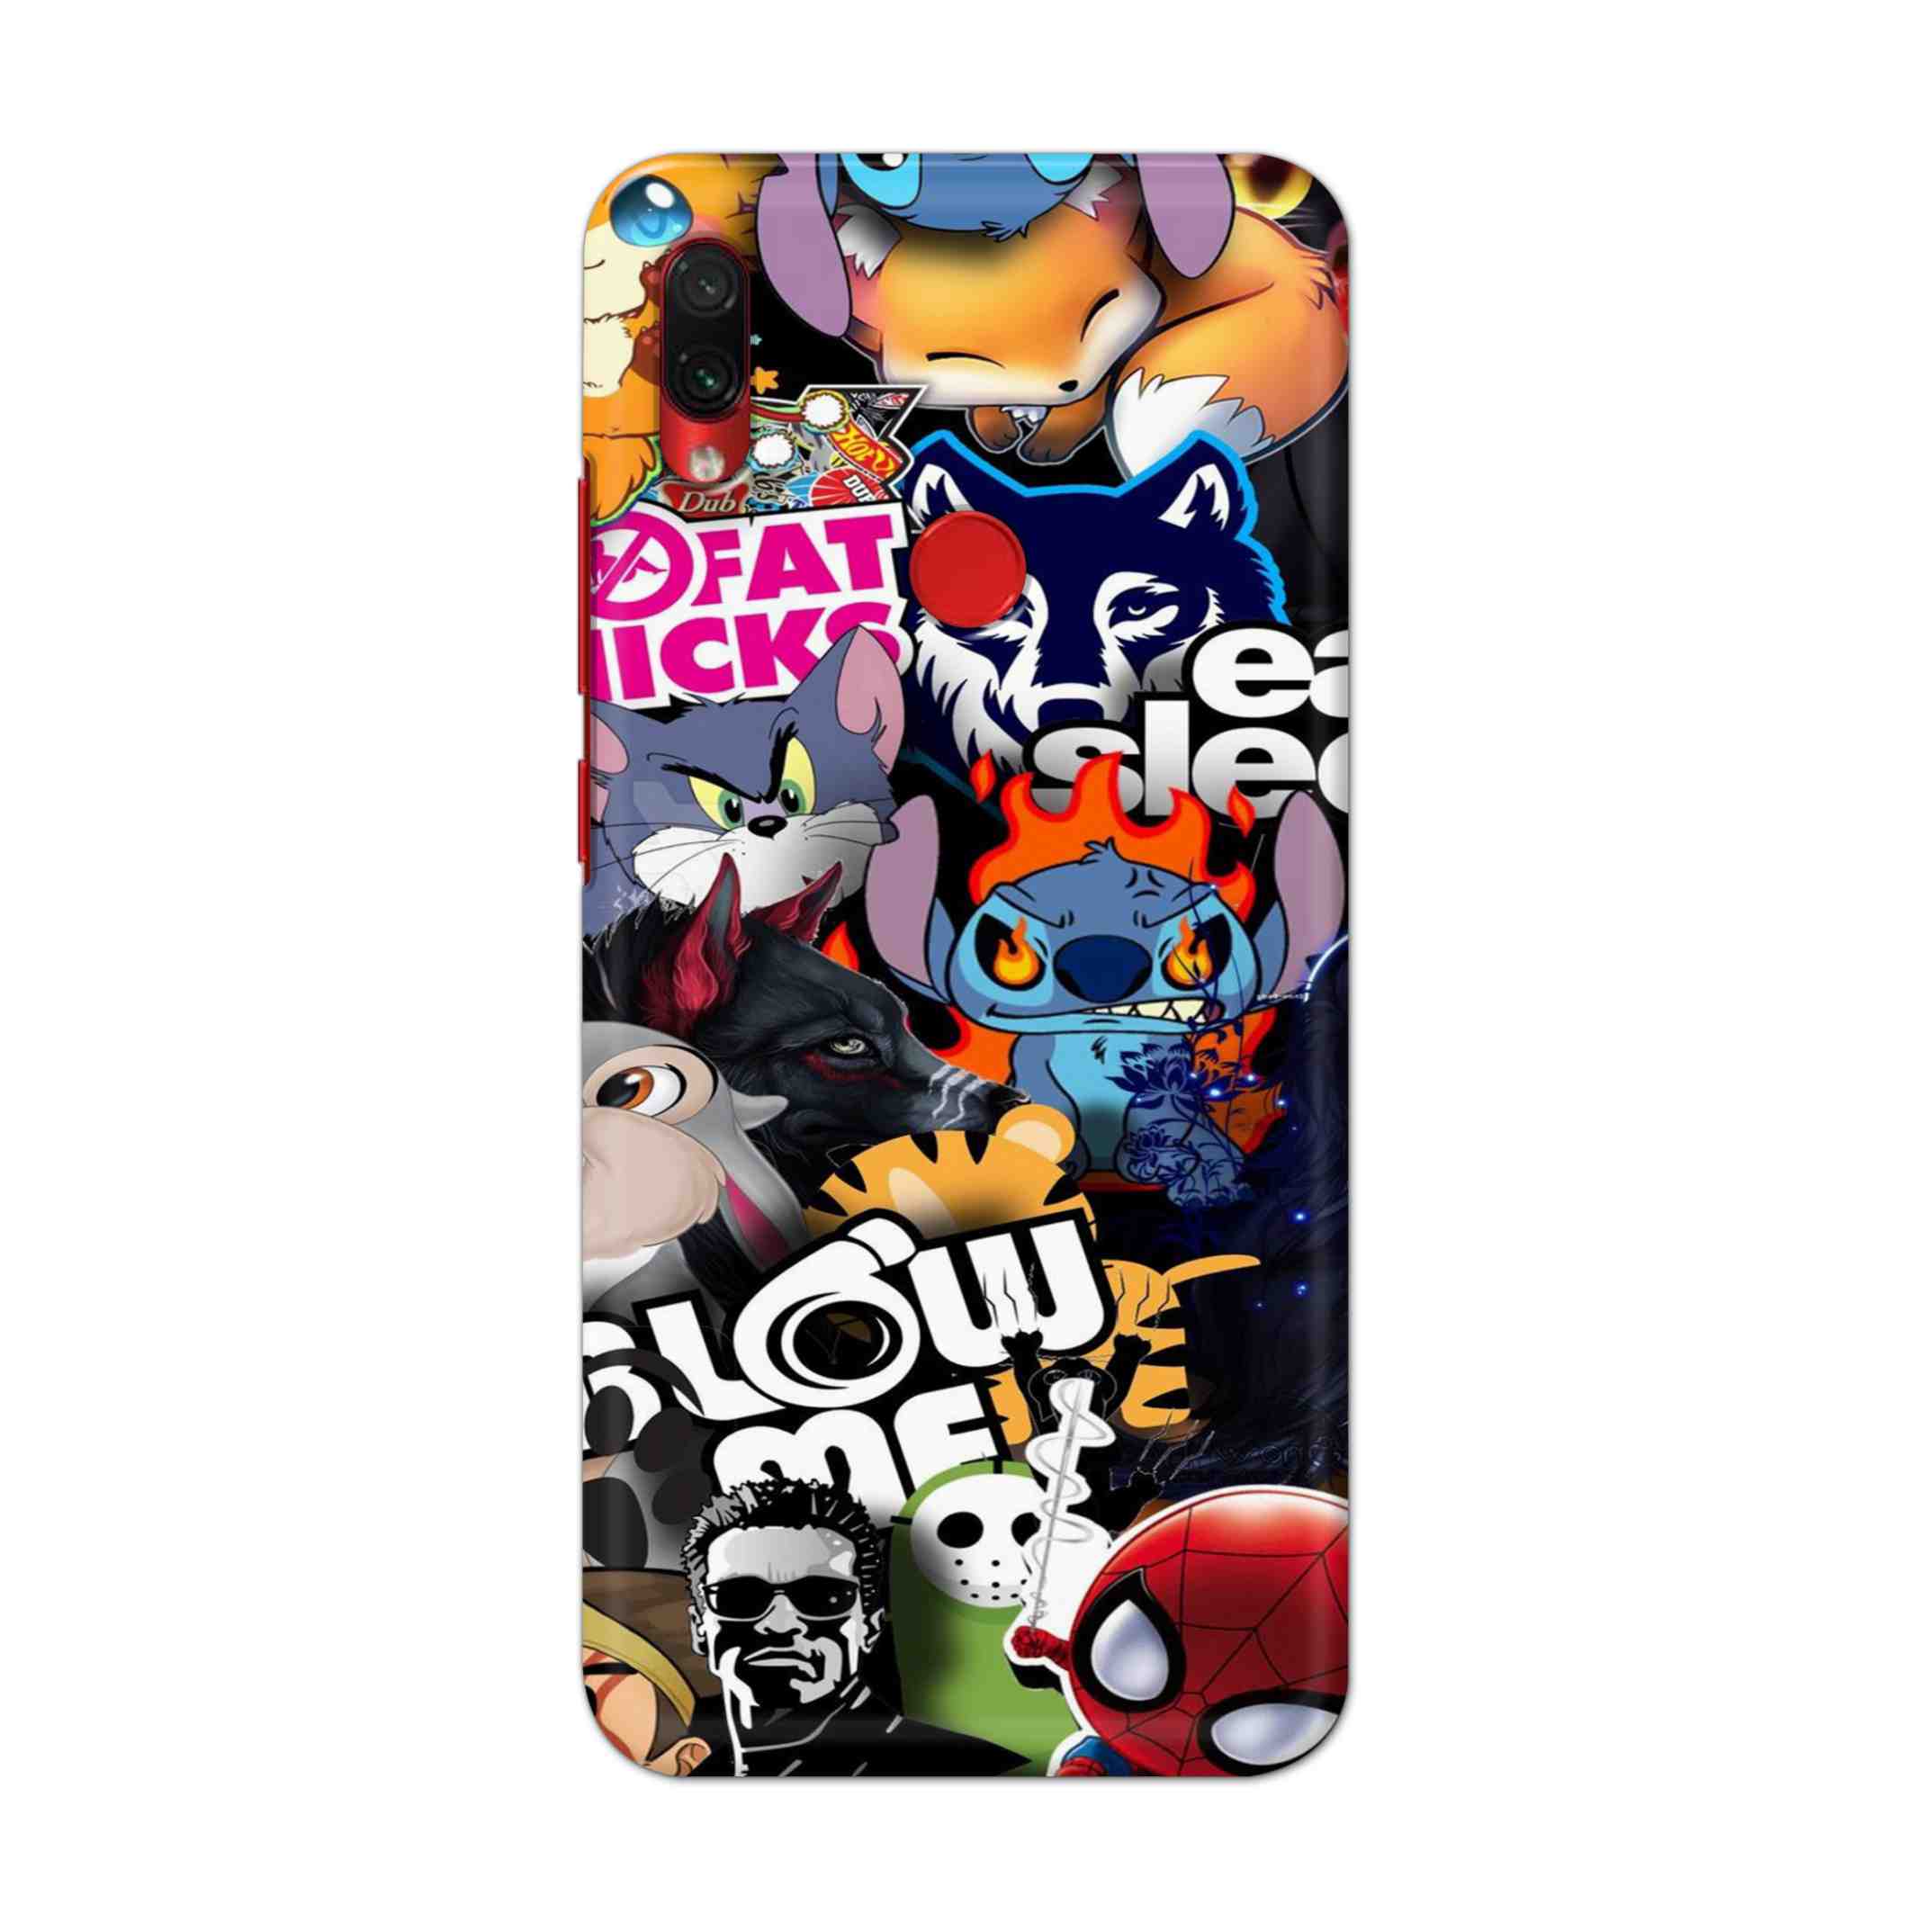 Buy Blow Me Hard Back Mobile Phone Case Cover For Xiaomi Redmi Note 7S Online